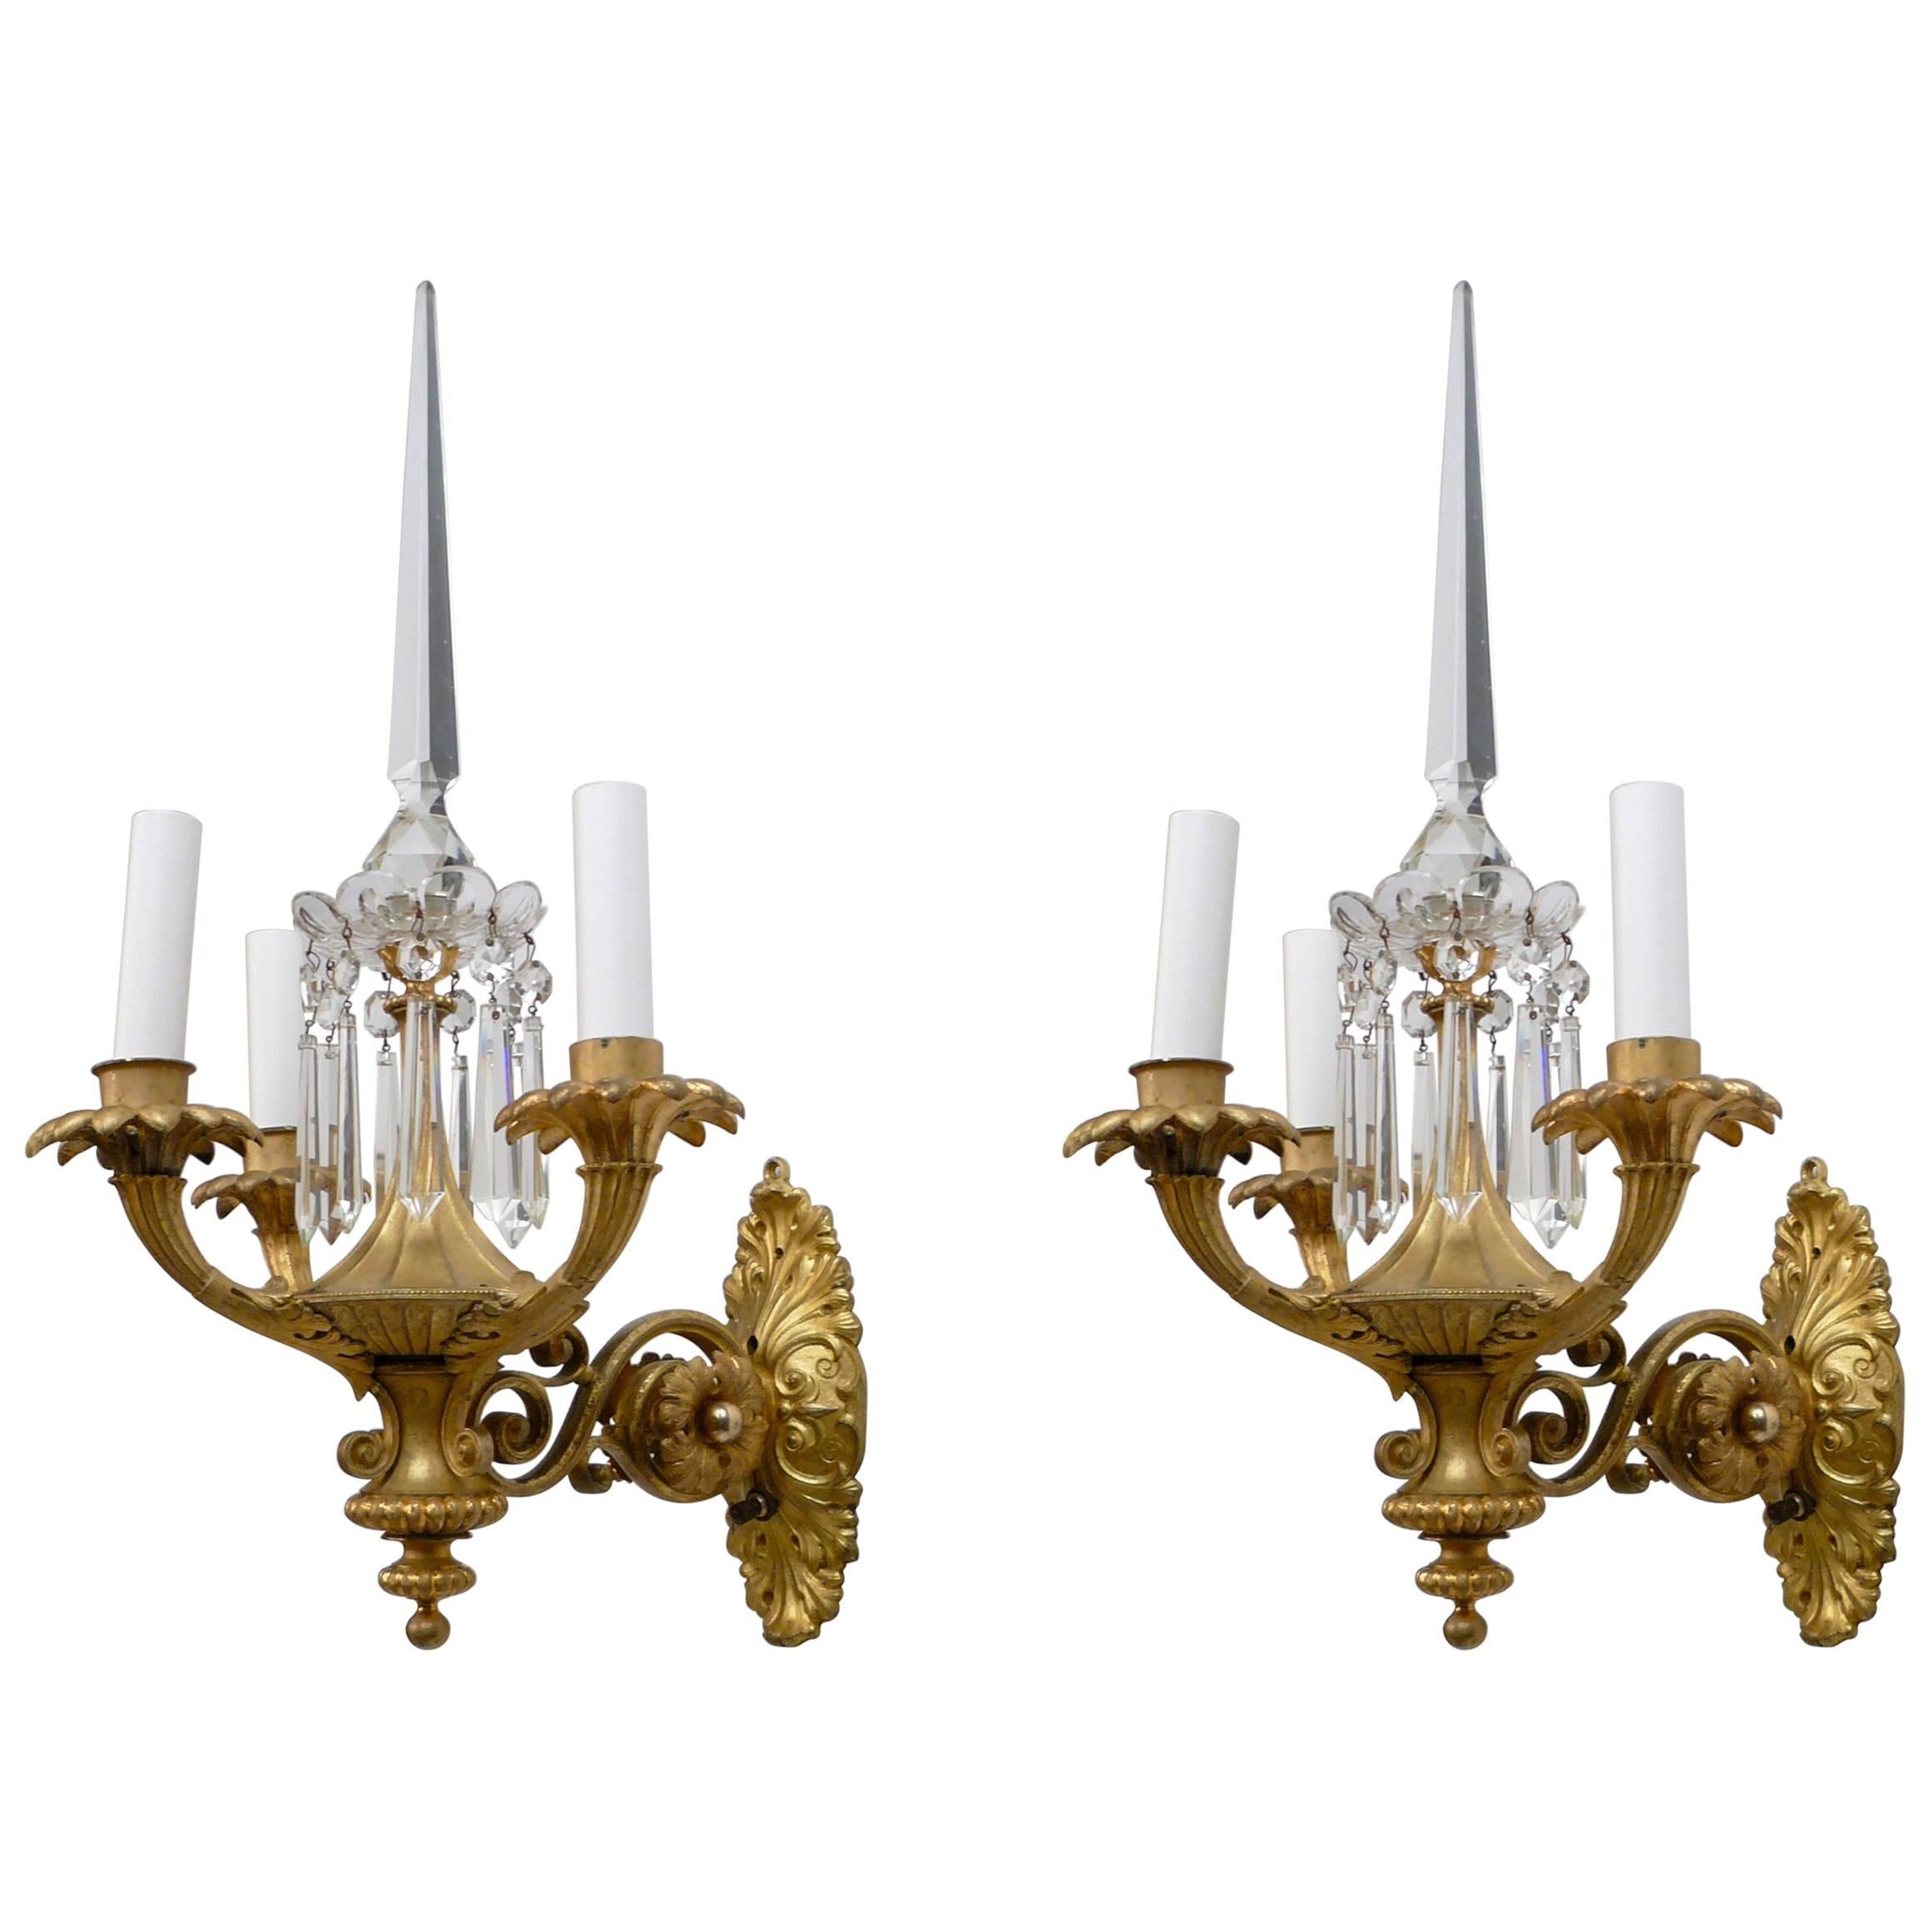 Pair 19th Century English Gilt Brass and Crystal Neoclassical Style Sconces For Sale